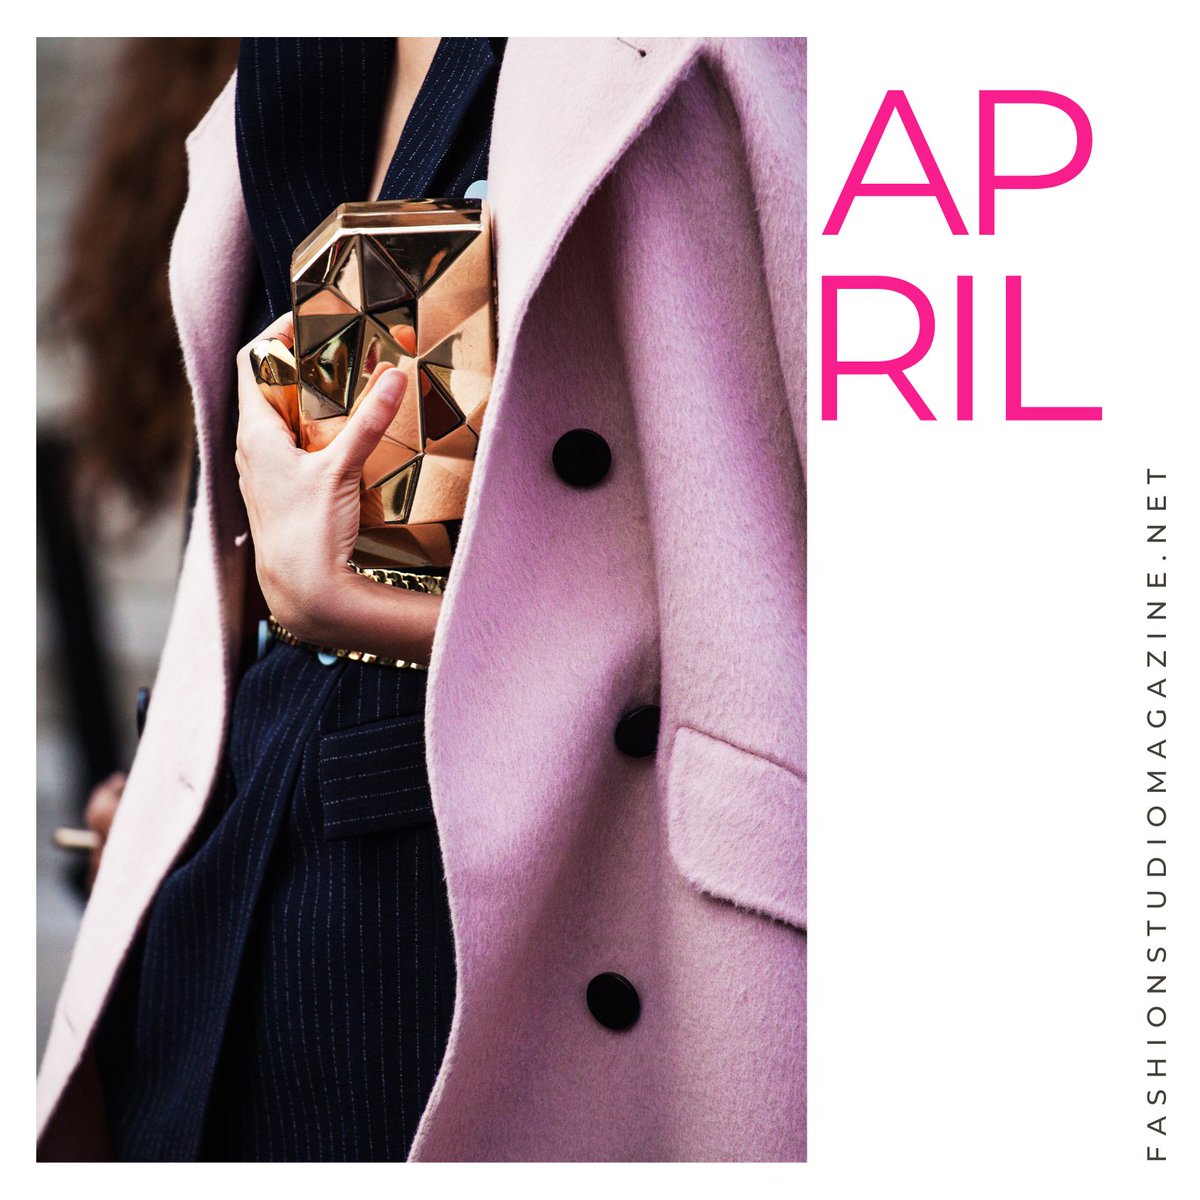 FASHION CALENDAR - APRIL'24 Hello April! Our monthly roundup of the most important fashion | art | travel | tech events is here. fashionstudiomagazine.net/post/fashion-c… #fashionweek #fashioncalendar #events #april #savethedate #fashionblogger #fashionnews #lifestyle